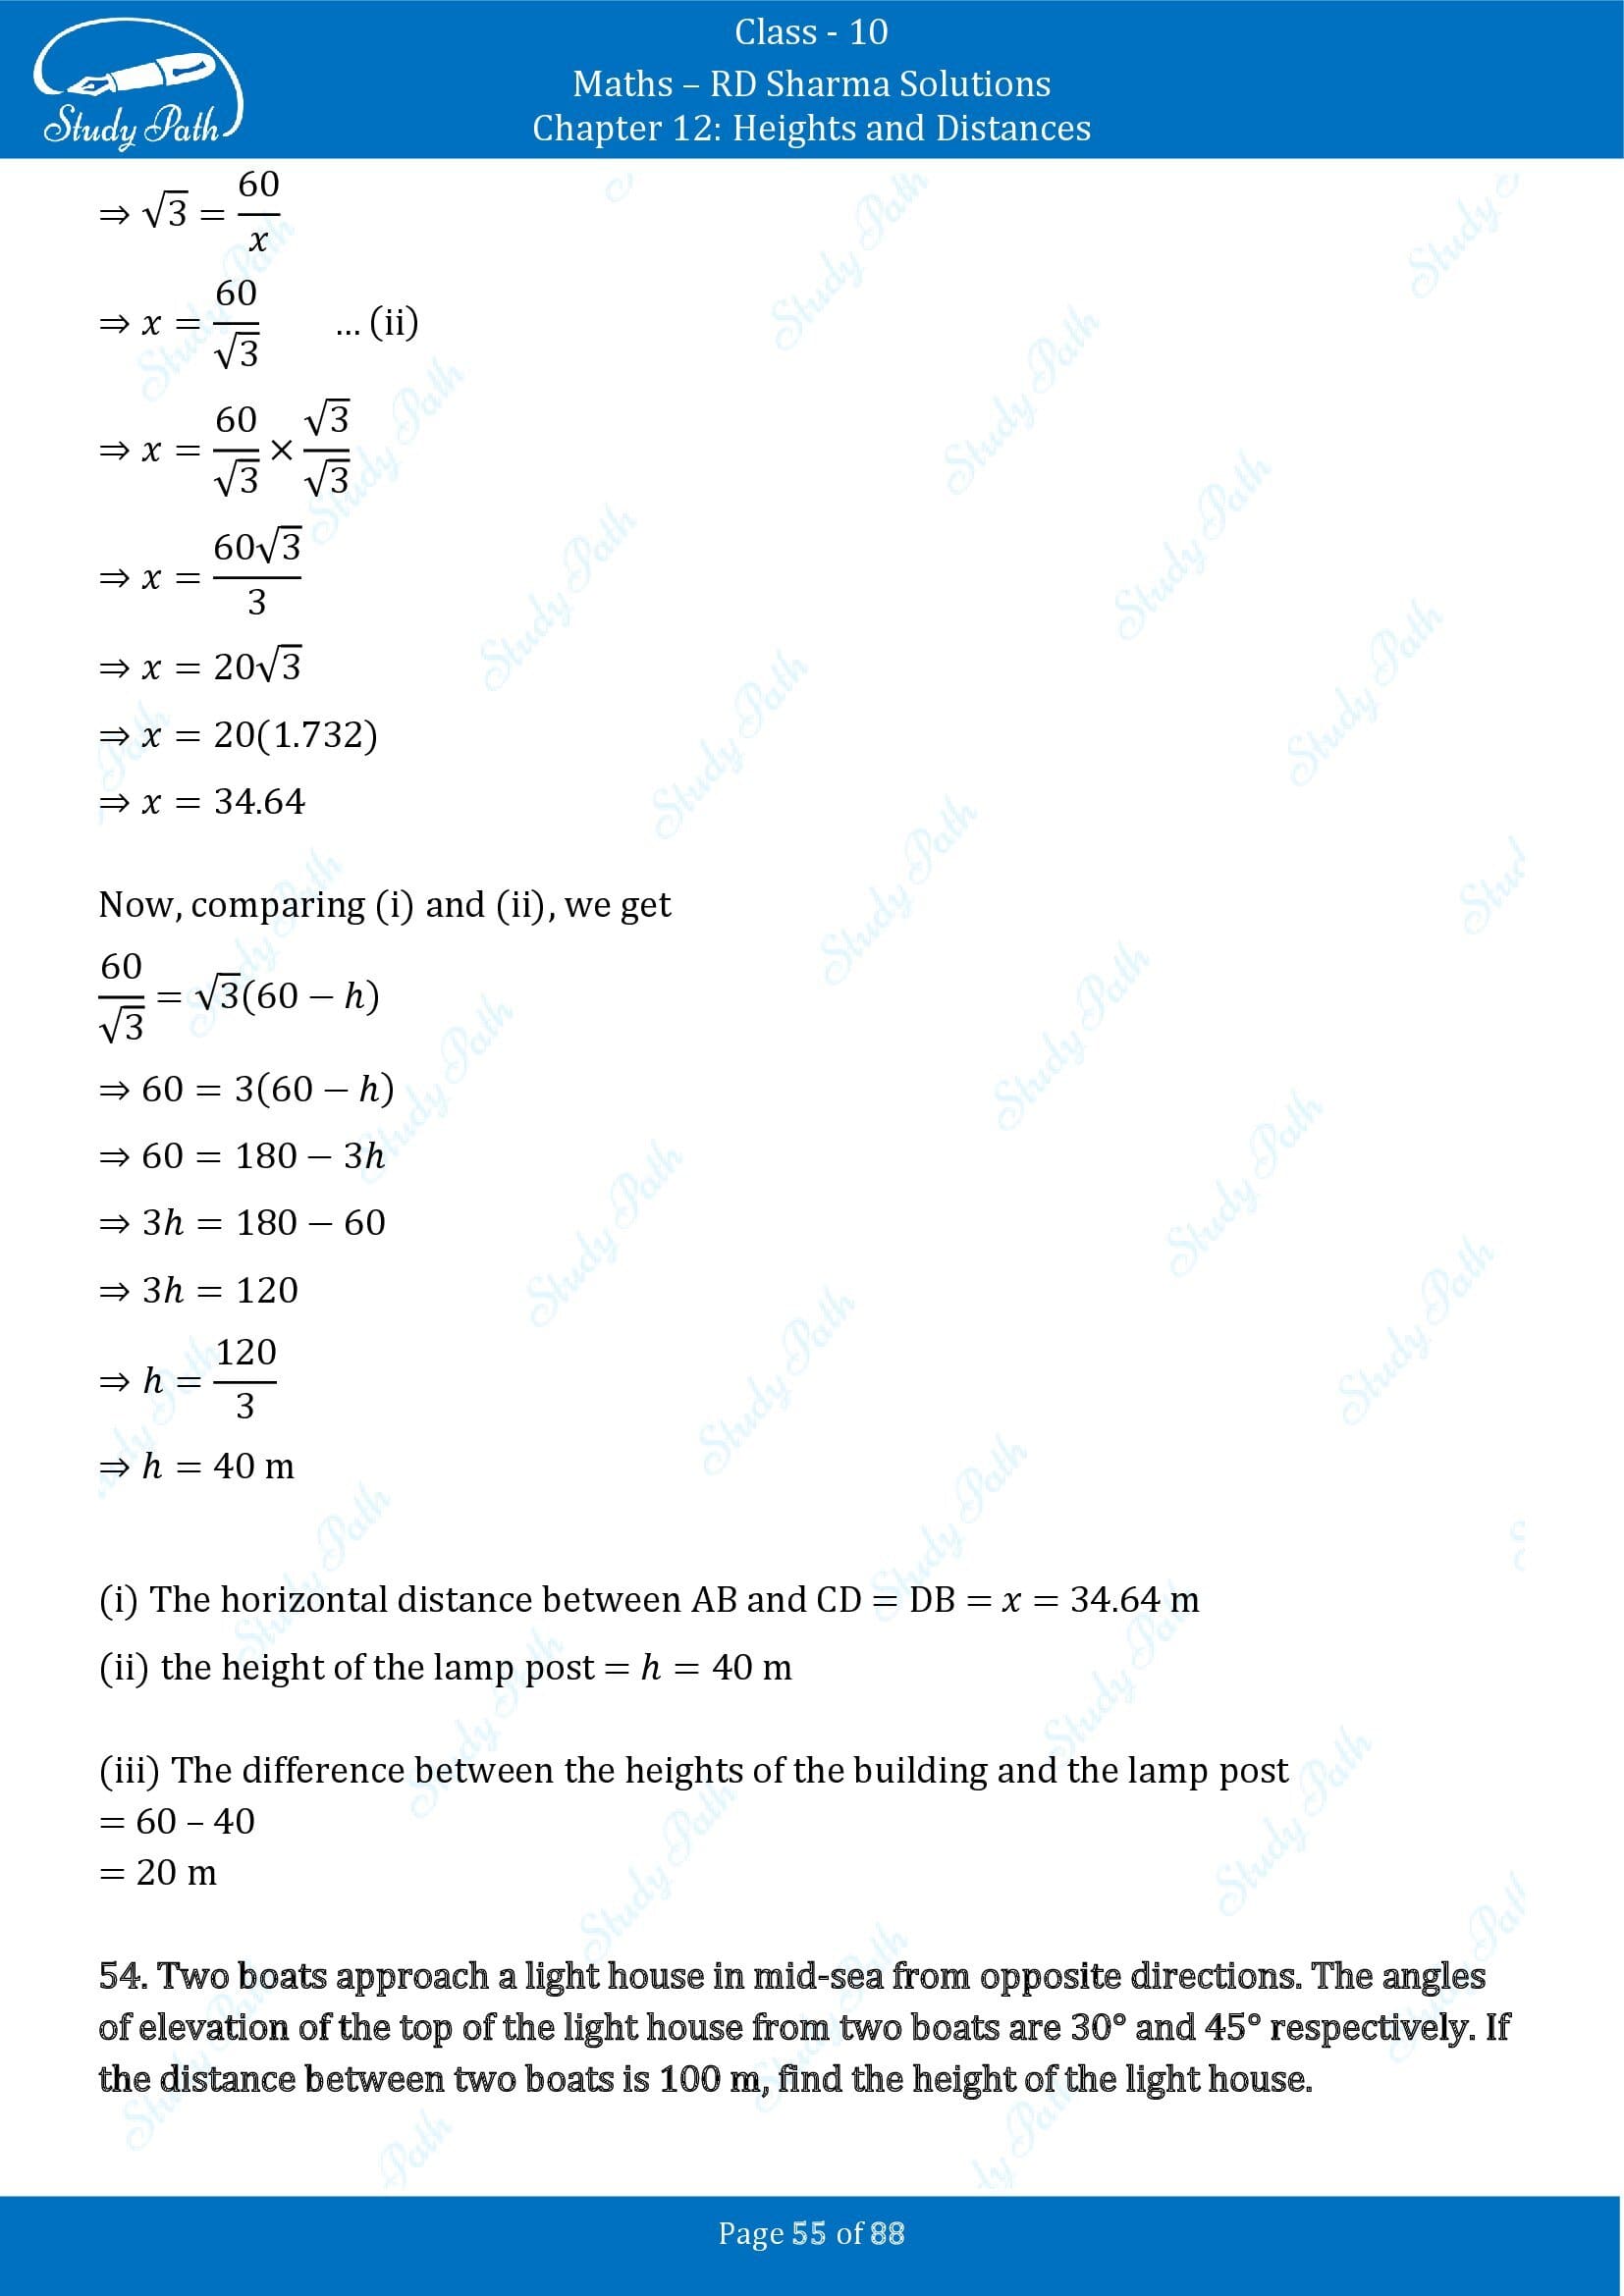 RD Sharma Solutions Class 10 Chapter 12 Heights and Distances Exercise 12.1 00055